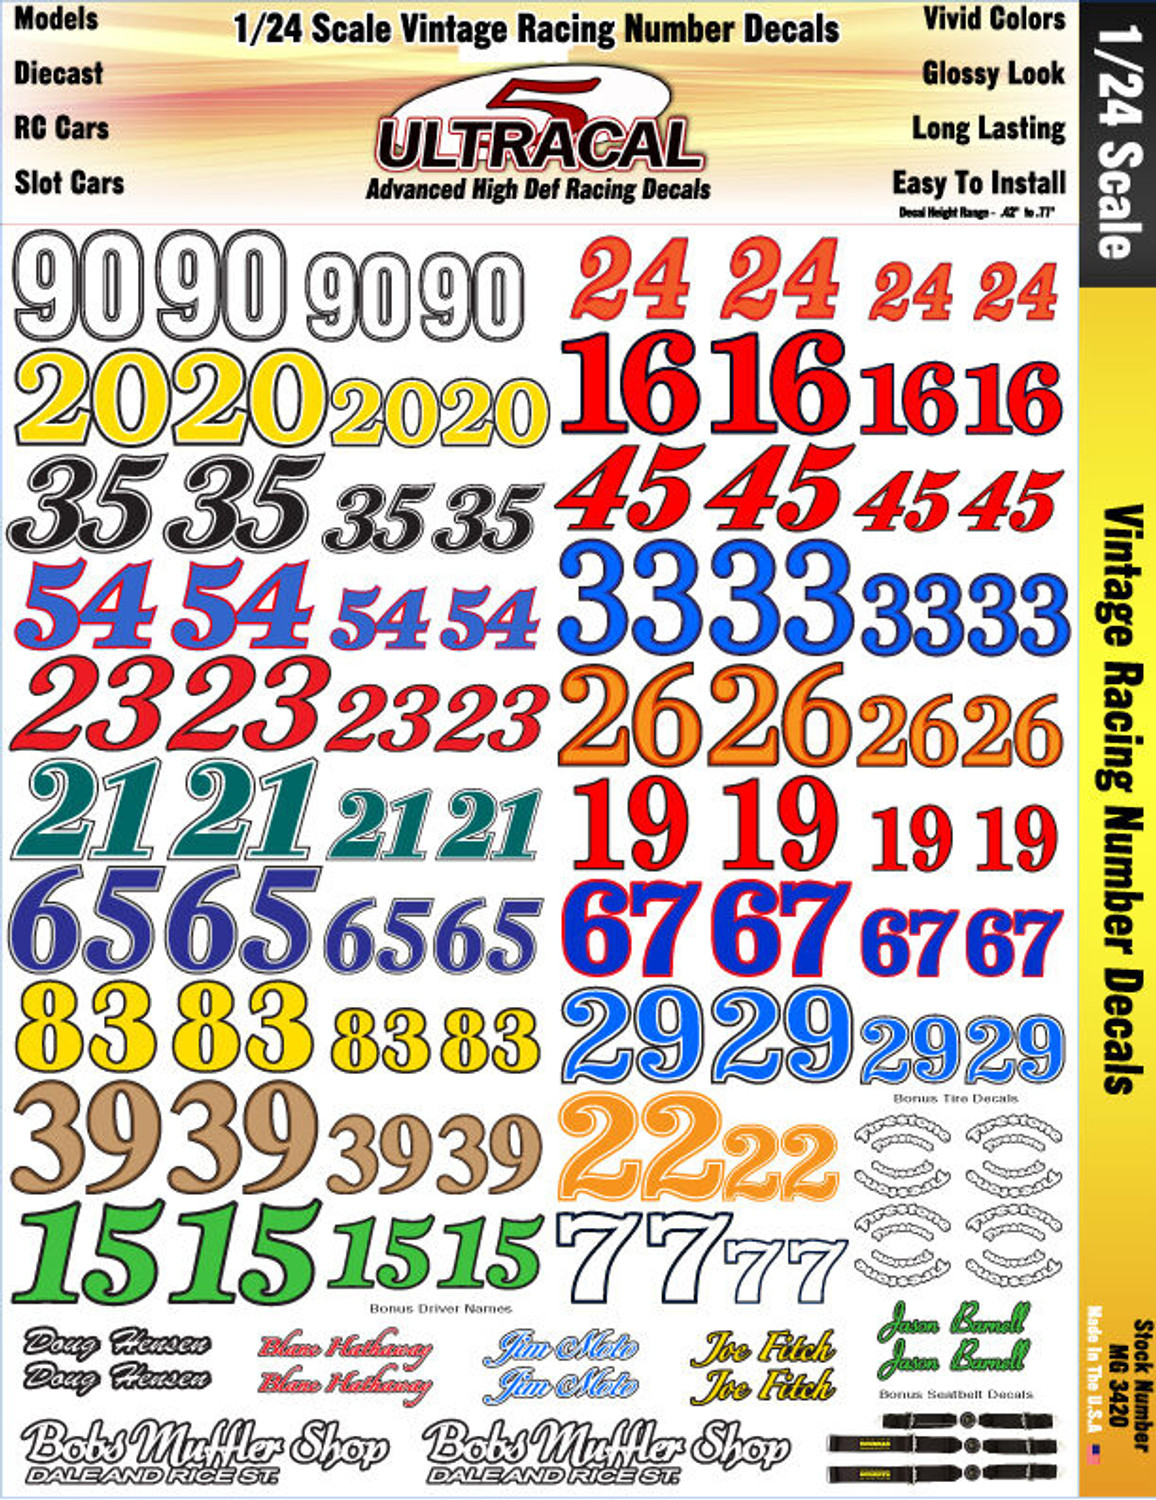 MG 3420 Utracal - Vintage Racing Number - High Definition Racing Decals for 1:24 scale